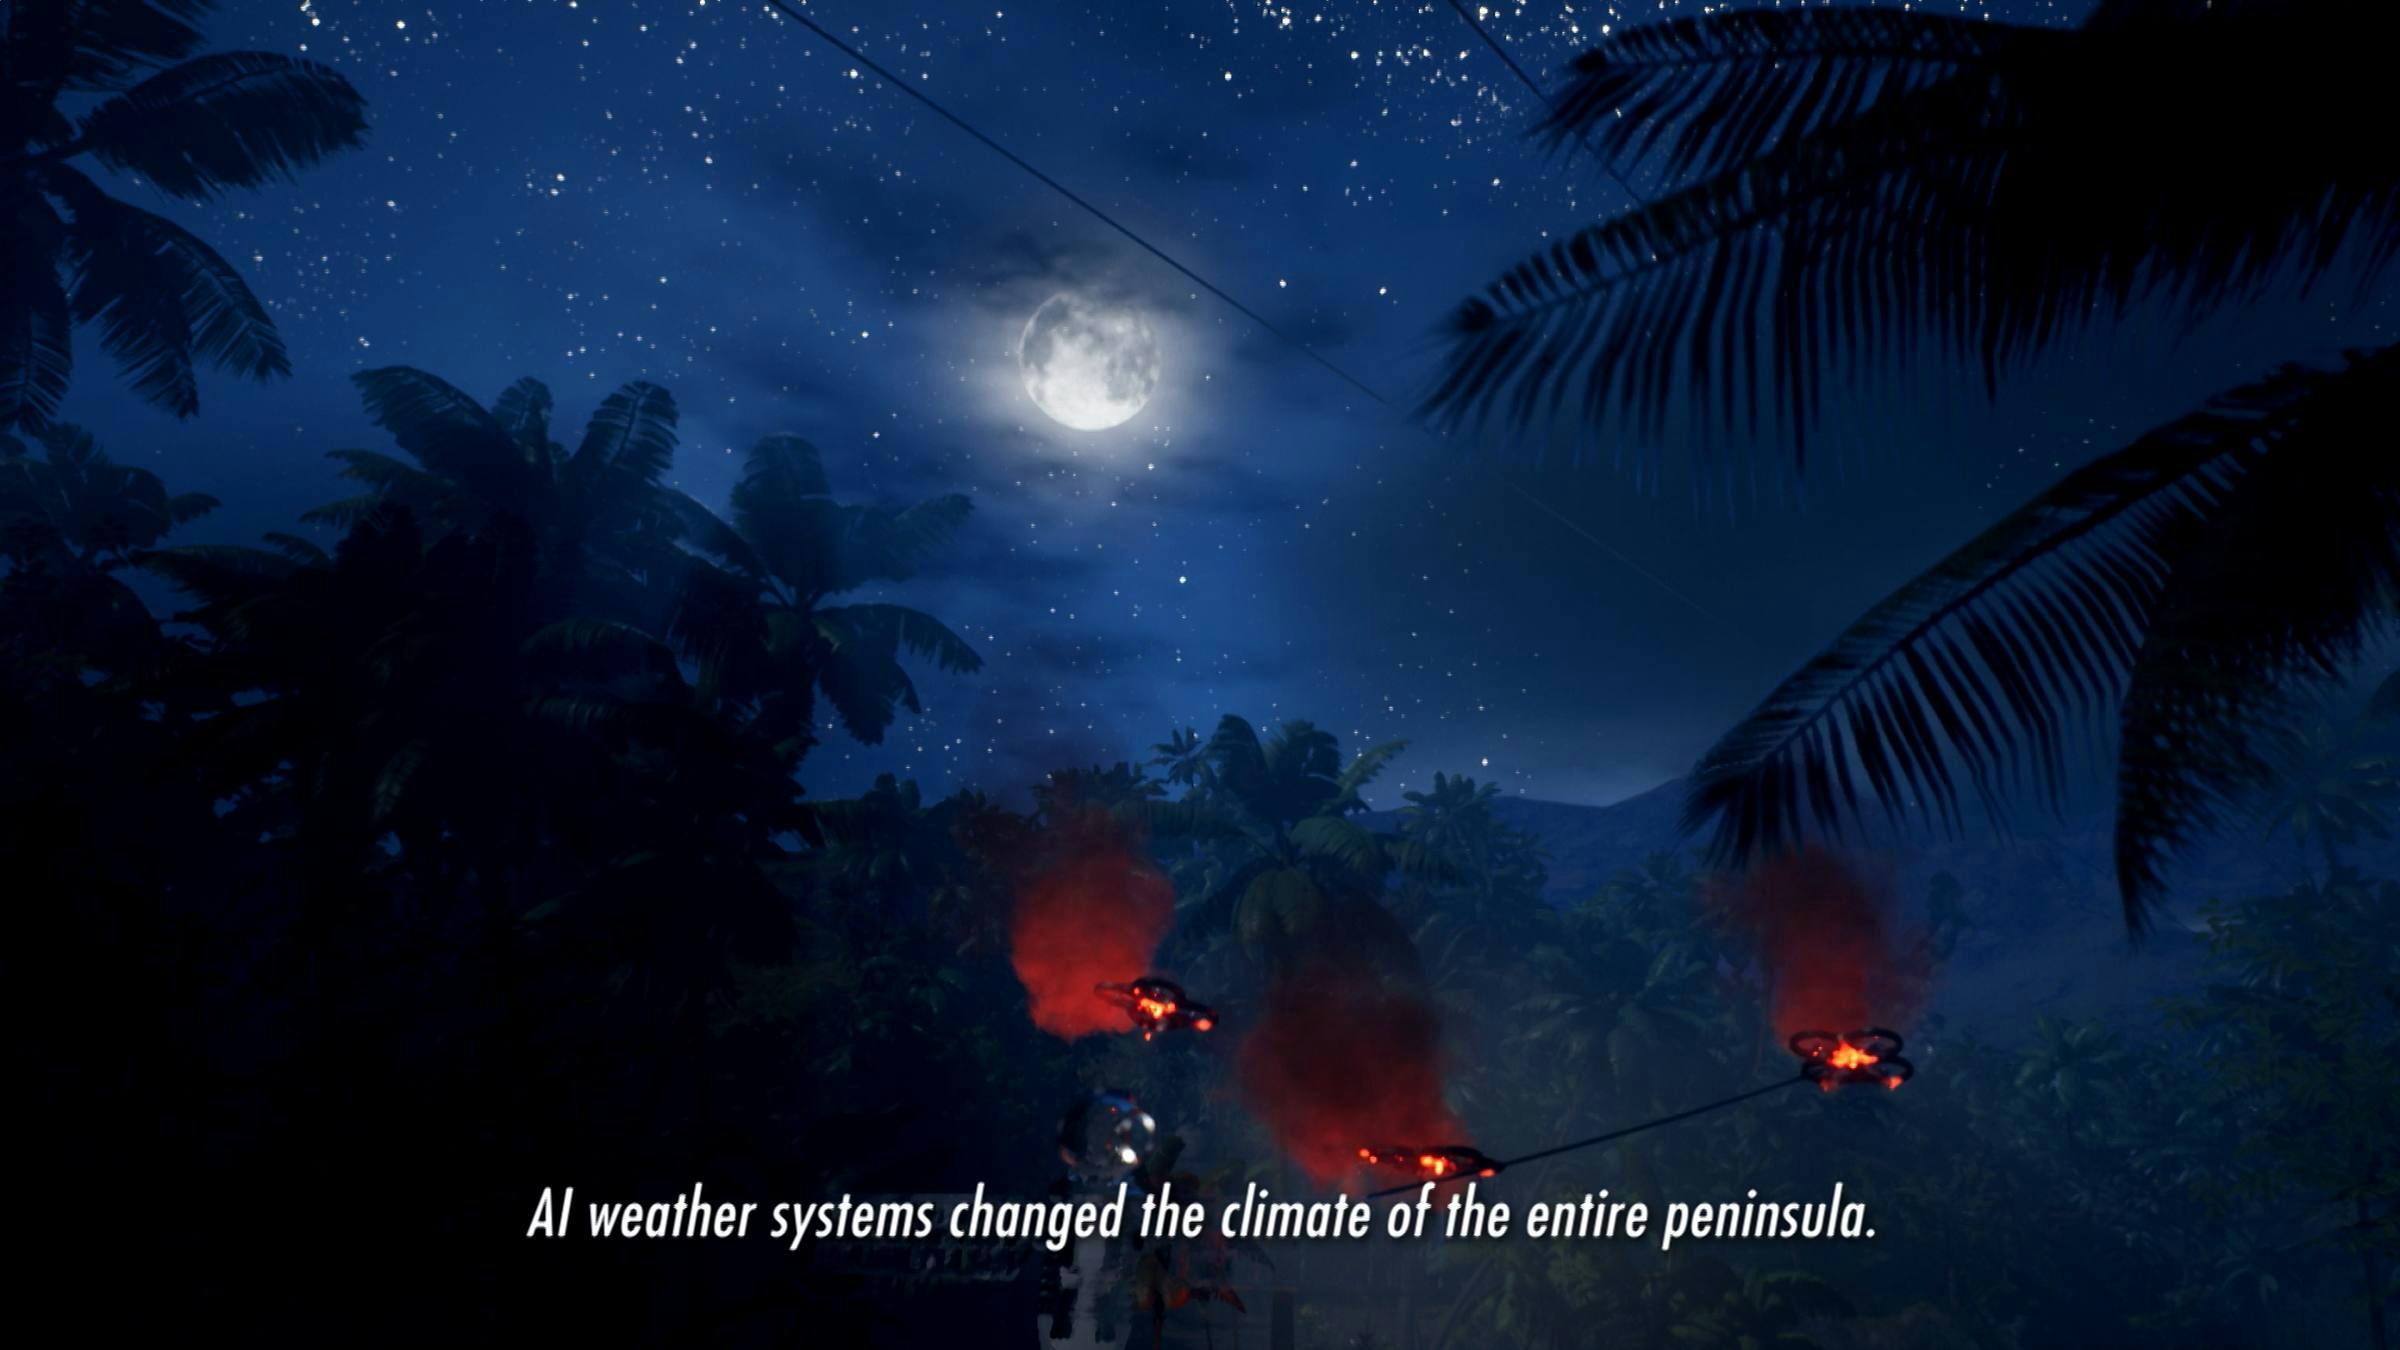 Computer generated image of the night sky with the moon poking through the clouds. In the foreground, there are three drone flying. The words 'AI weather systems change the climate of the entire peninsula.' are superimposed on top.